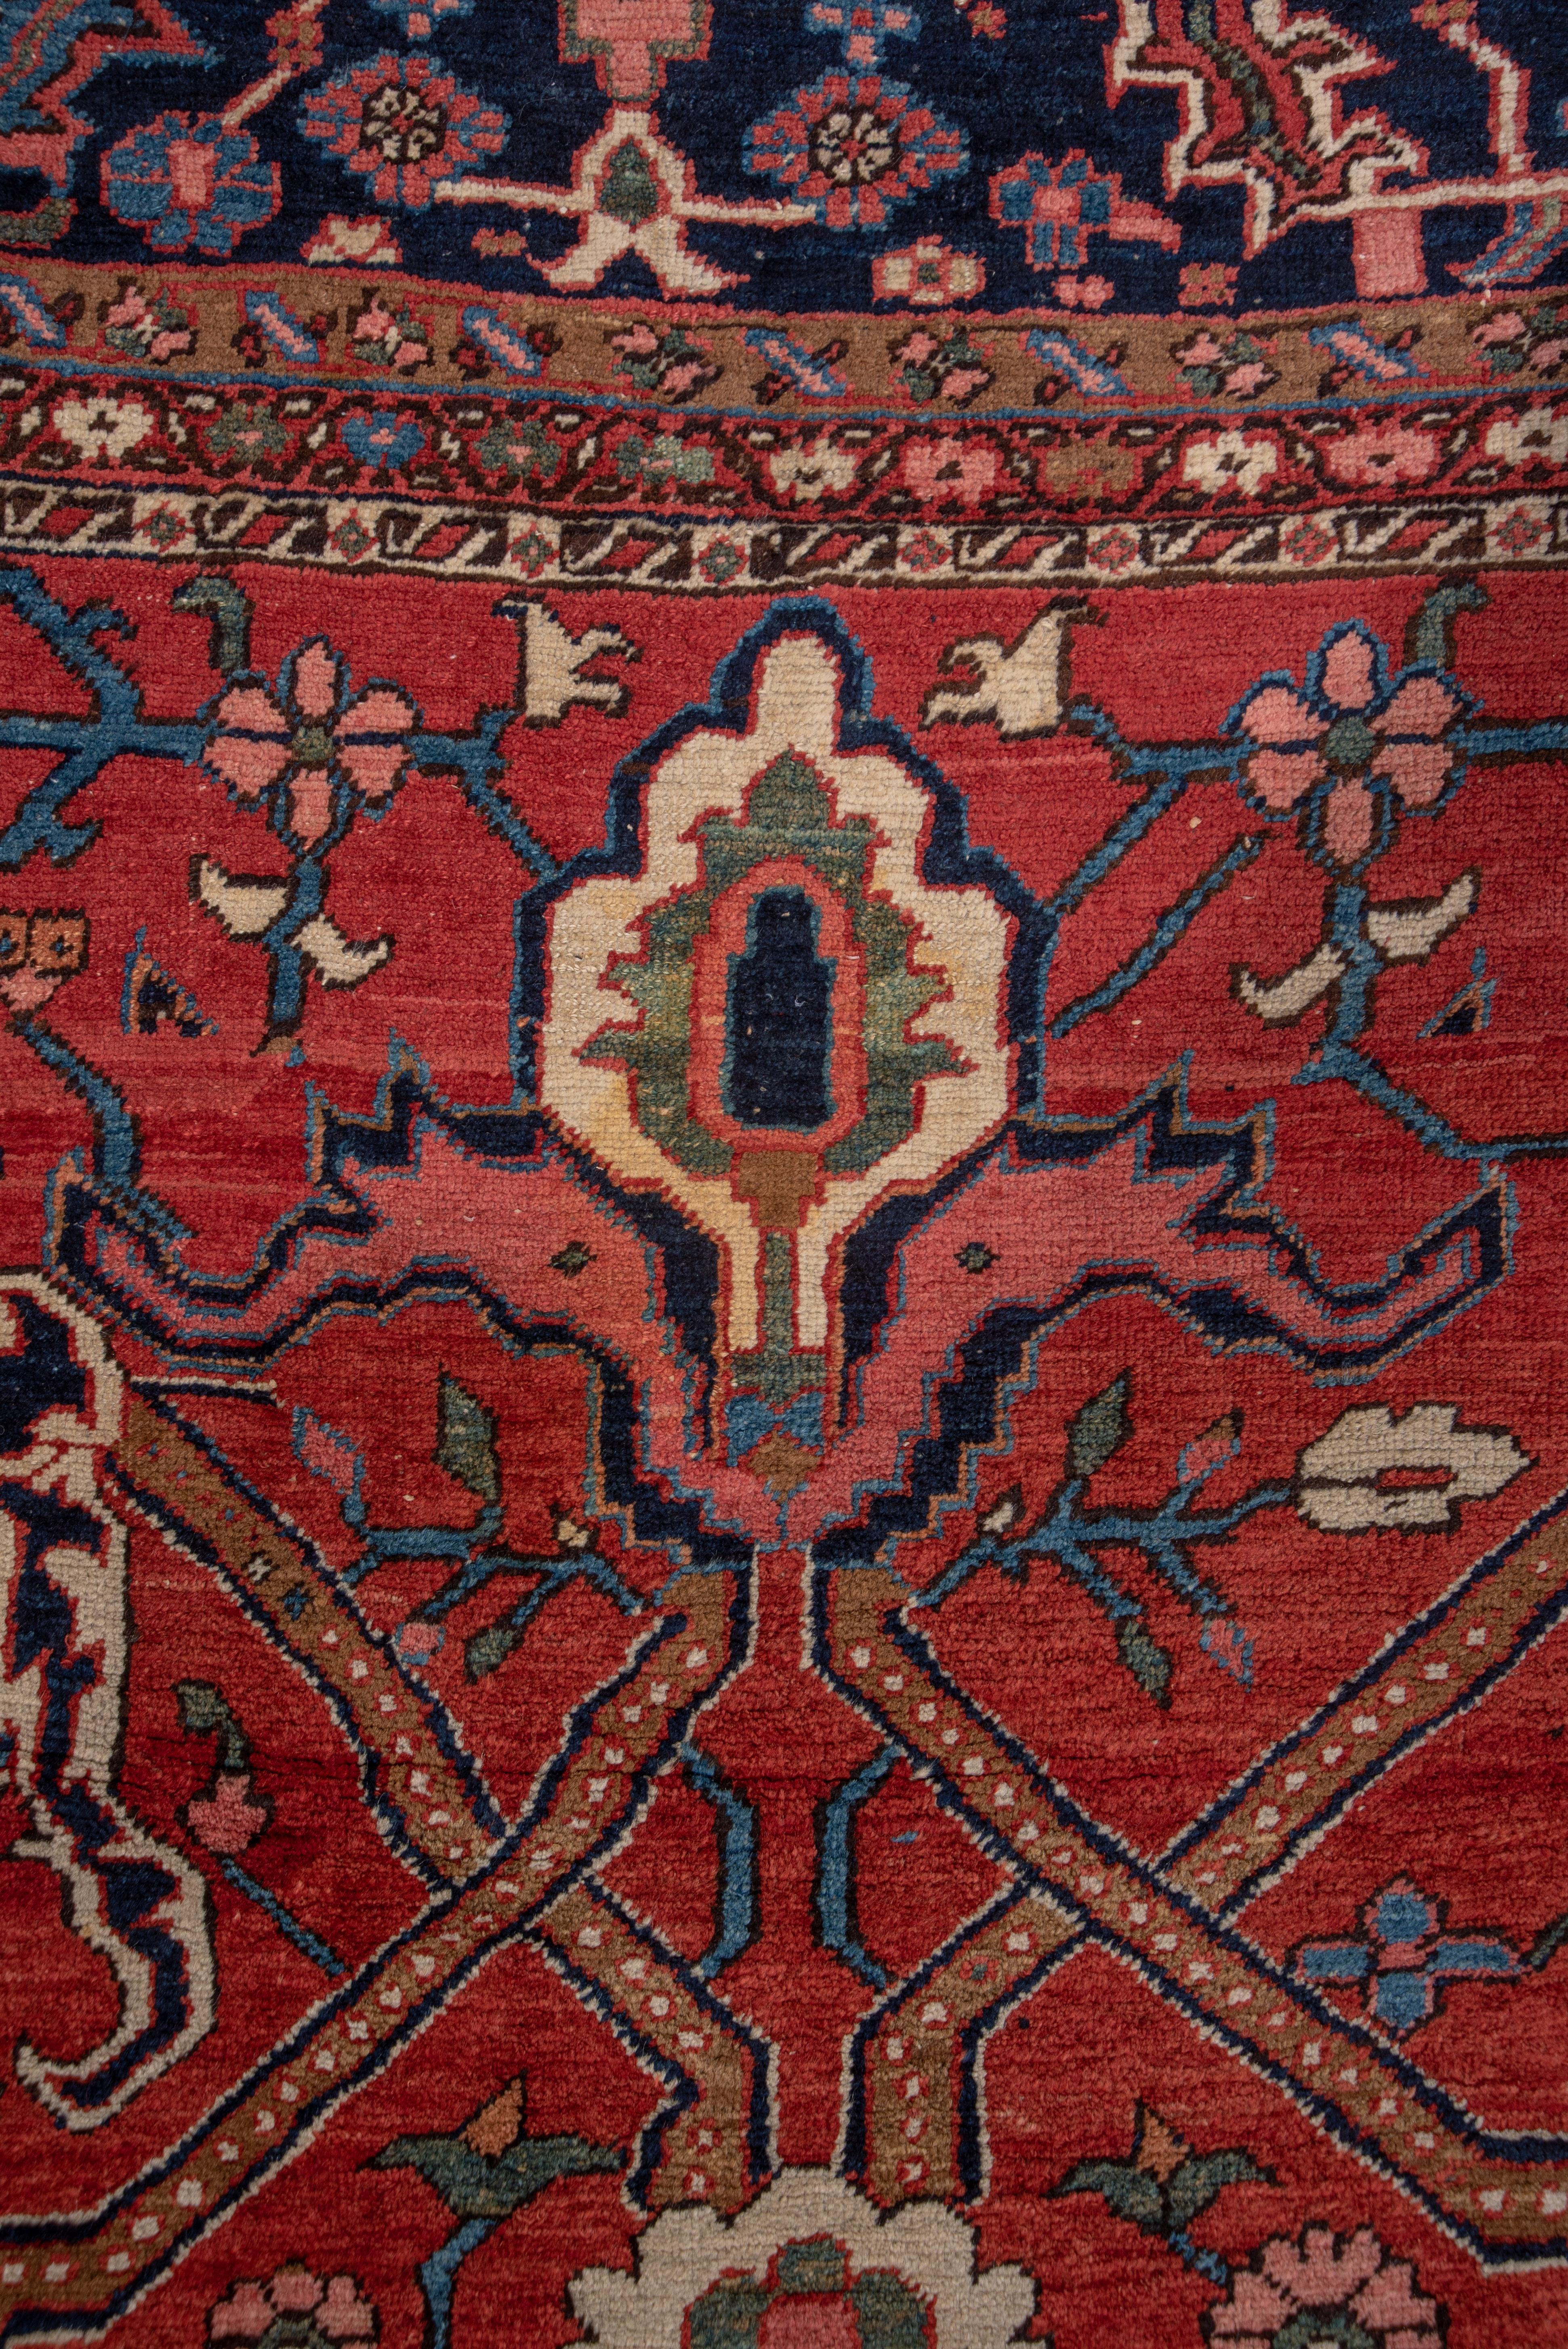 This magnificent NW Persian rustic oversize carpet from circa 1910 displays a warm madder tomato red field with a strong dark blue strap work pattern organizing winged escutcheons and palmette pendants around a central multi-petal rosette. The scale